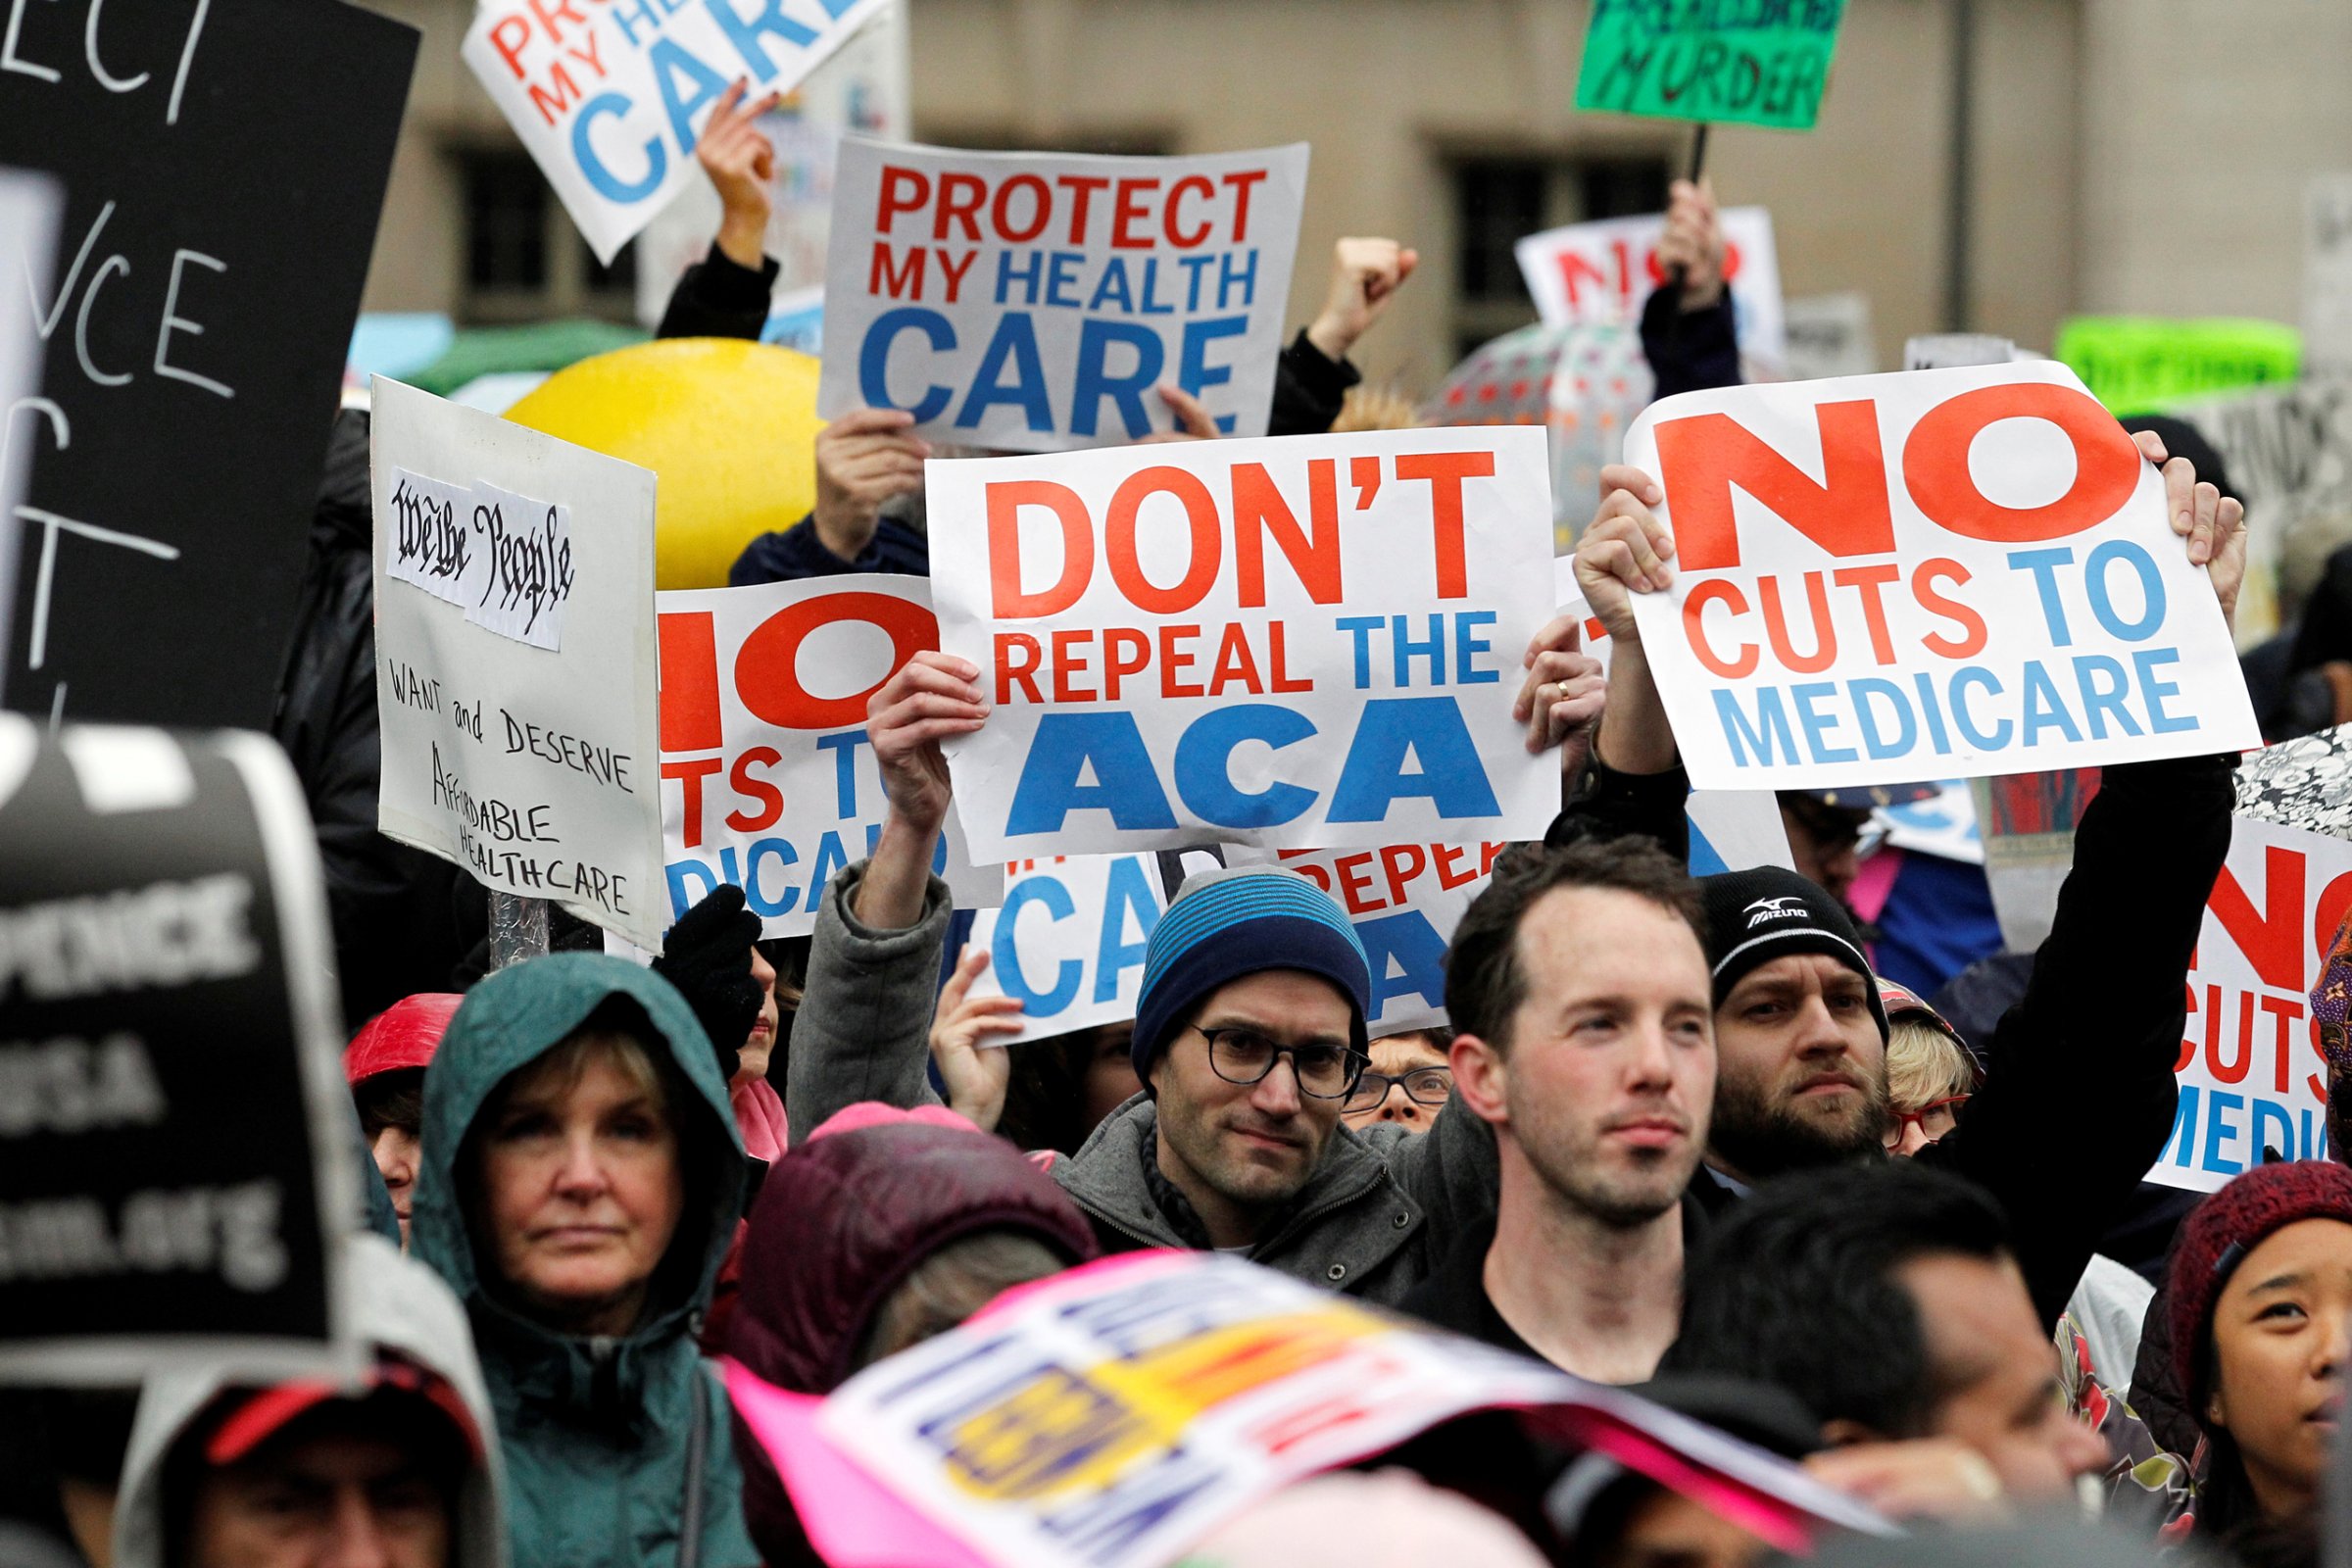 Demonstrators hold signs in support of the Affordable Care Act at a gathering before the start of a protest march near the hotel where House and Senate Republicans are attending a retreat, in Philadelphia, Pennsylvania, U.S. January 25, 2017. REUTERS/Tom Mihalek - RTSXJ6Z